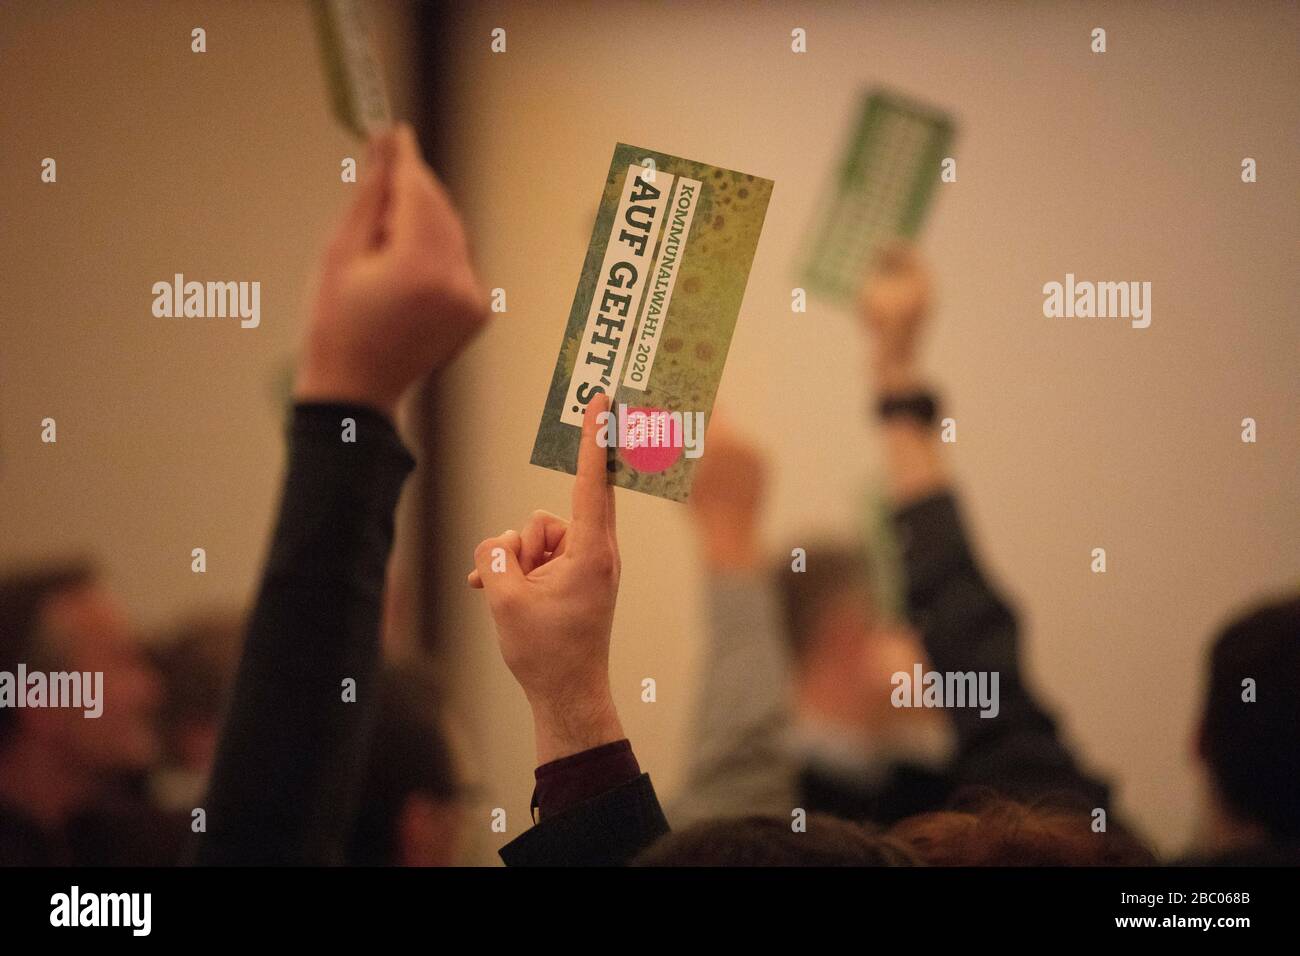 The Greens are drawing up their district council candidate list for the 2020 local elections in the Gernlinden citizens' centre. In the picture you can see the counting of the voter's entitlement to vote by a show of hands. [automated translation] Stock Photo